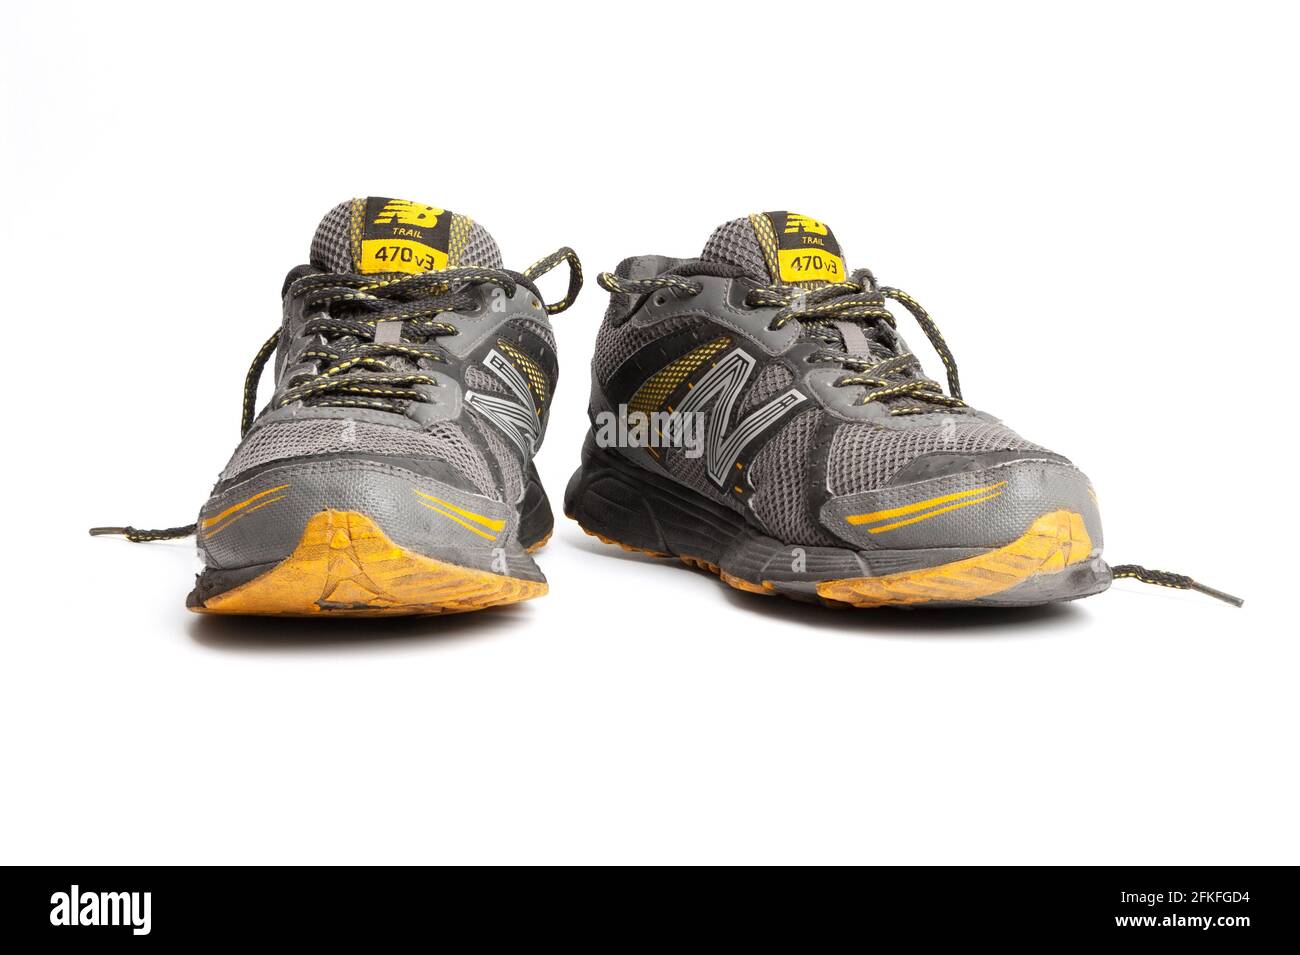 Chisinau, Moldova - April 30, 2021: New Balance shoes. A pair of dirty old New  Balance 470 v3 running trainers with holes in on a white background Stock  Photo - Alamy